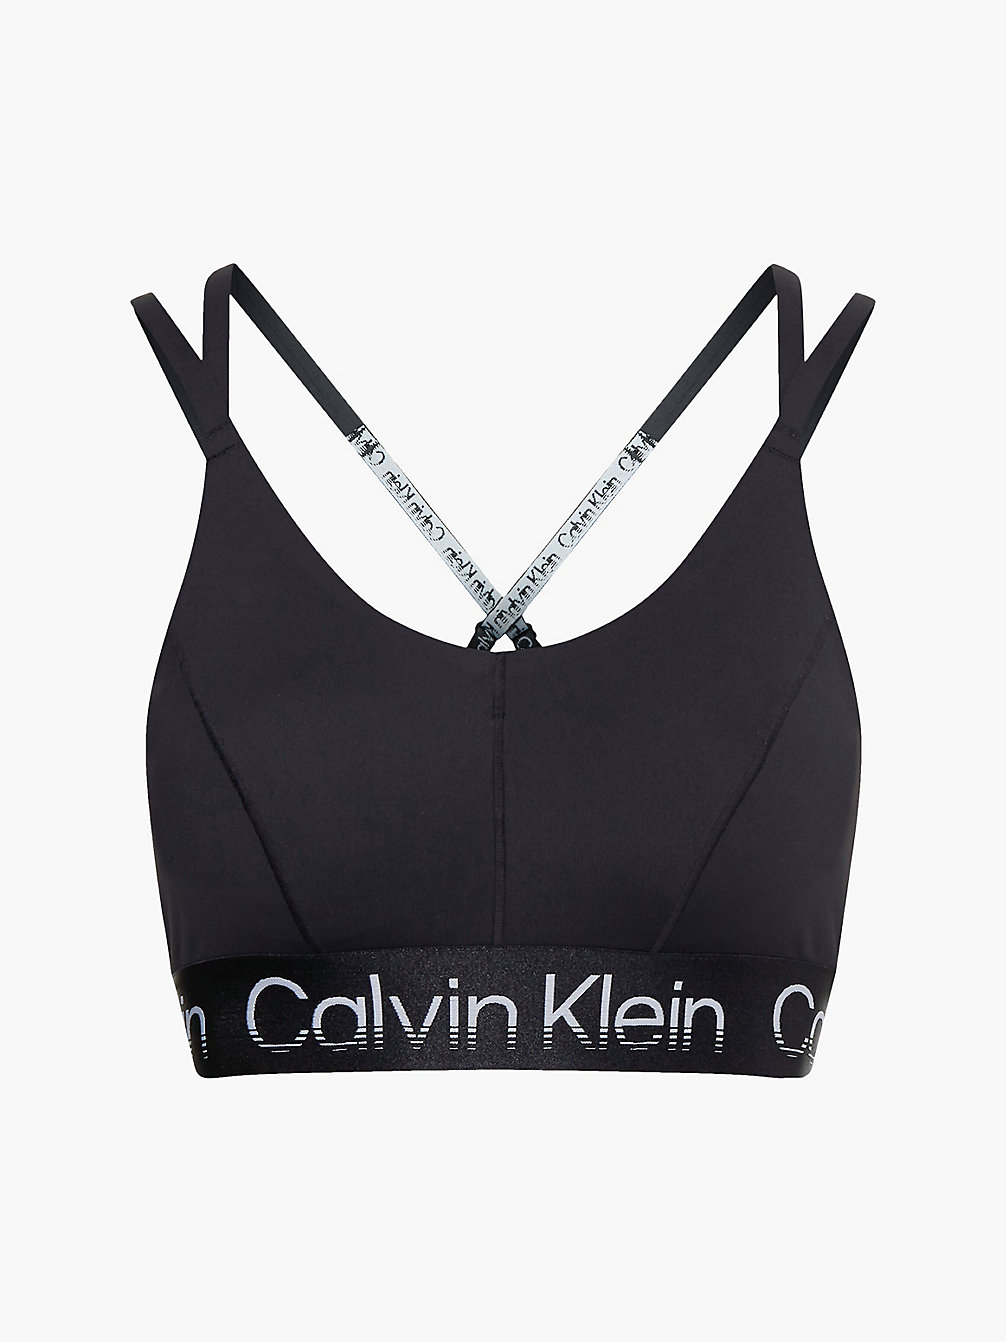 BLACK BEAUTY Recycled High Impact Sports Bra undefined women Calvin Klein